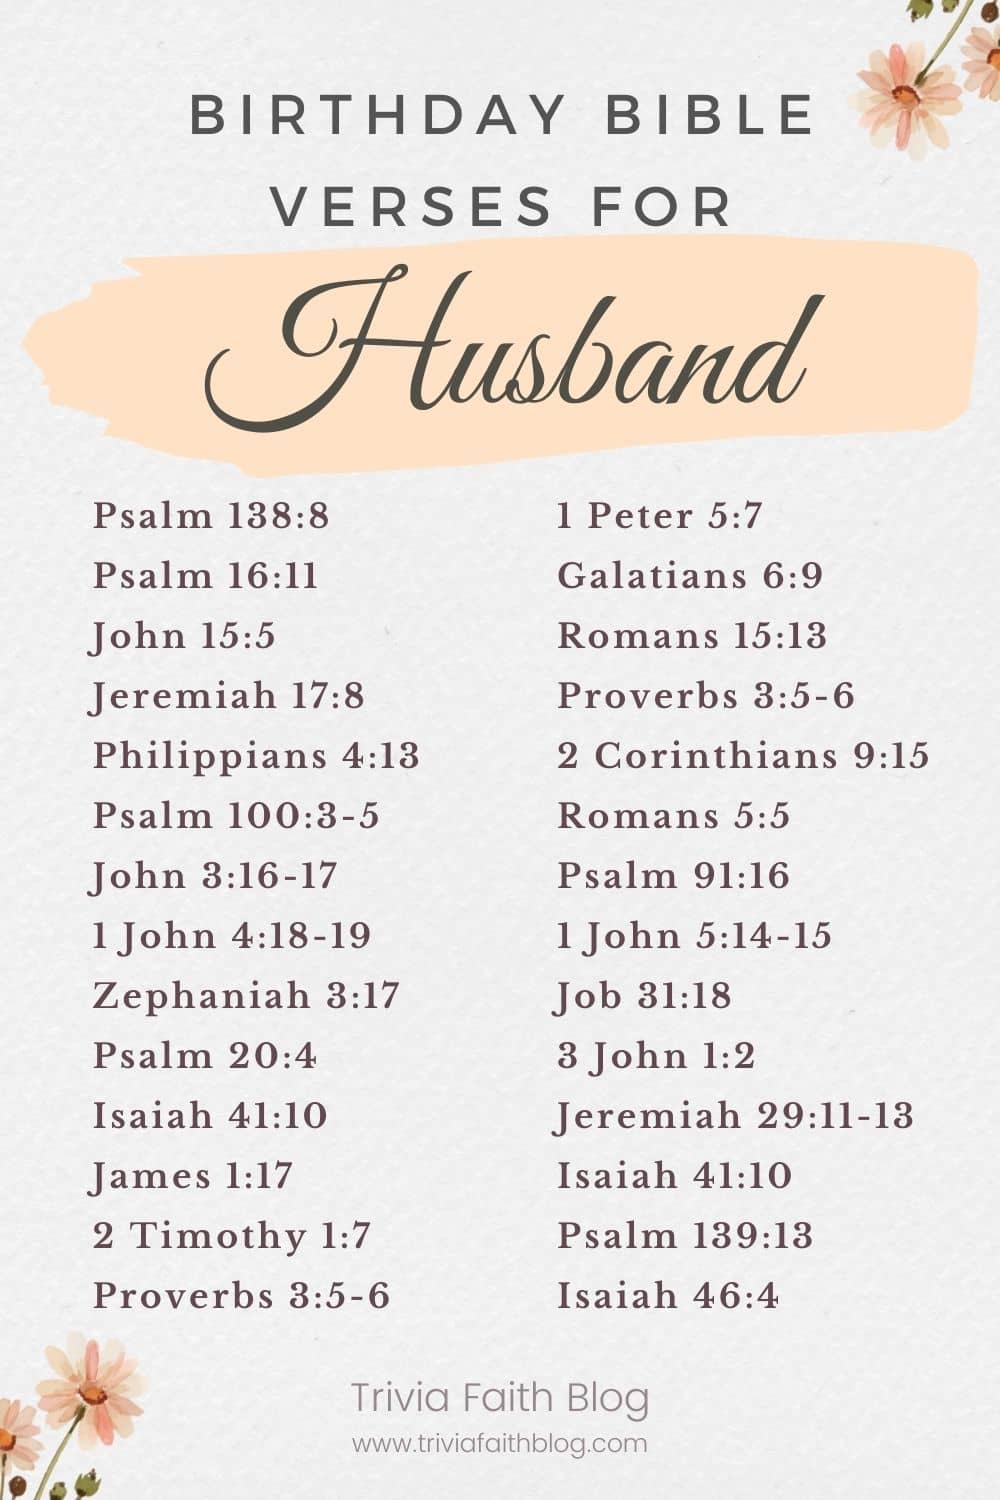 Bible verses for birthday for husband